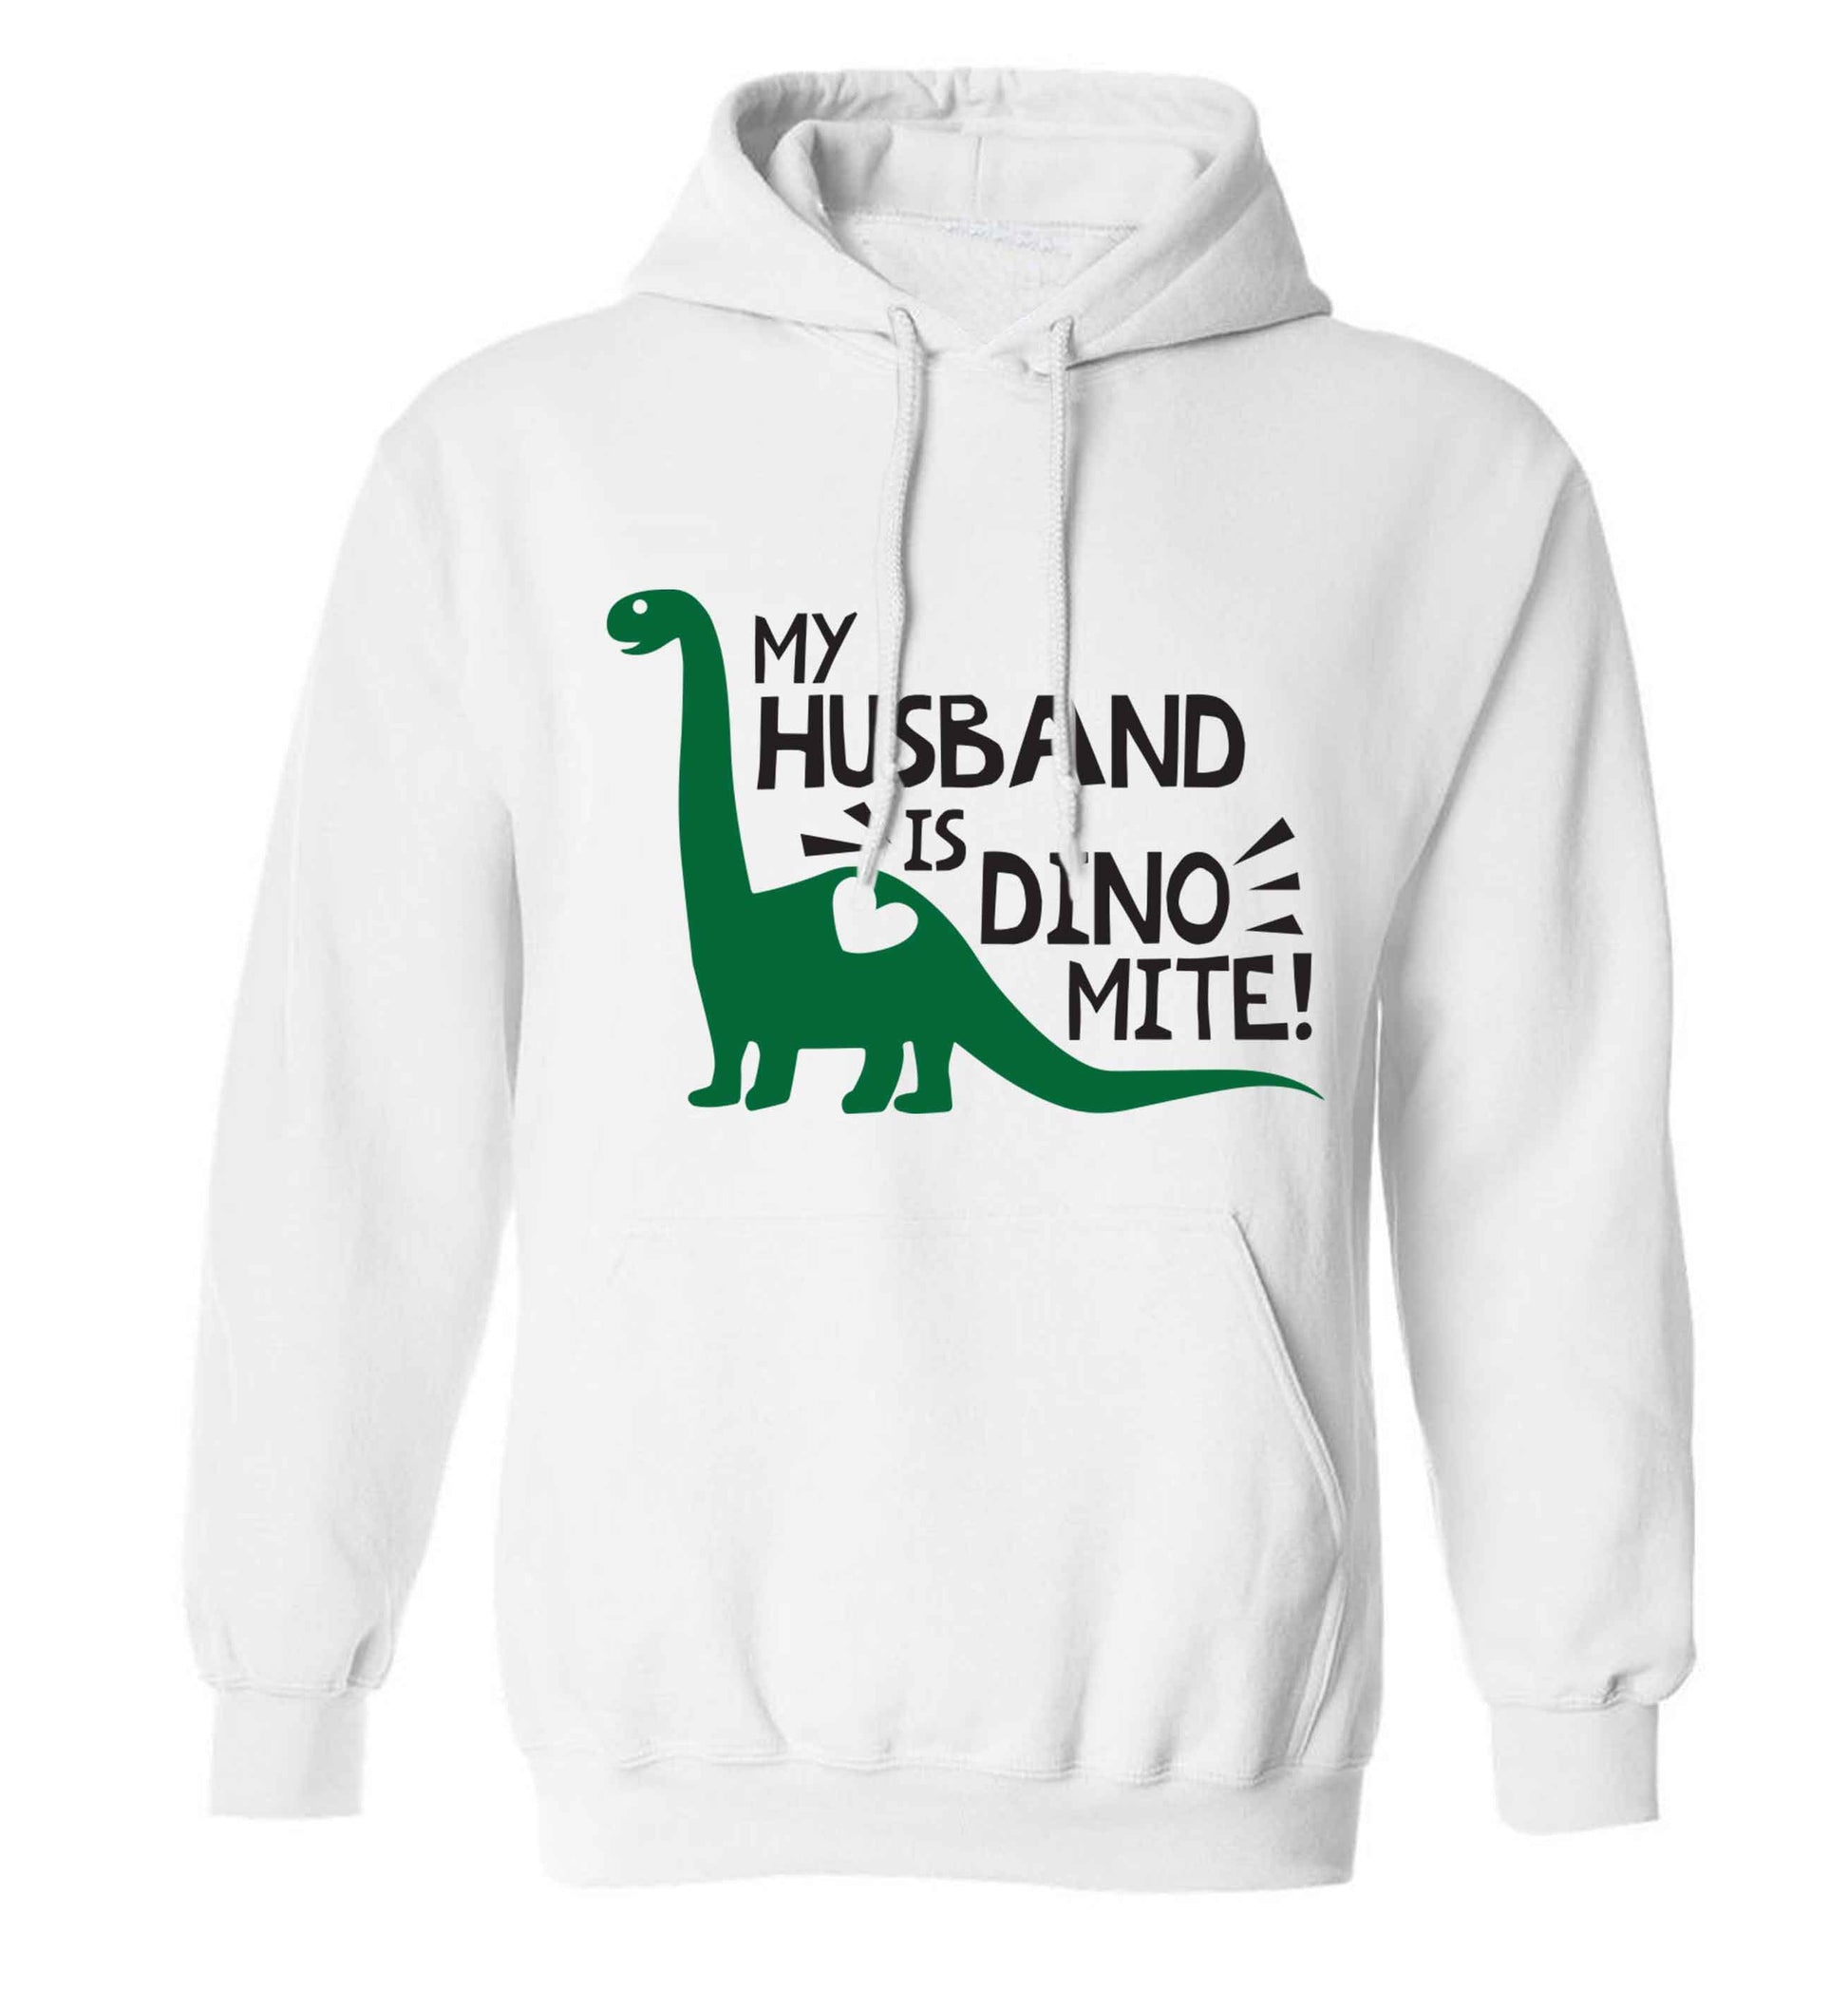 My husband is dinomite! adults unisex white hoodie 2XL